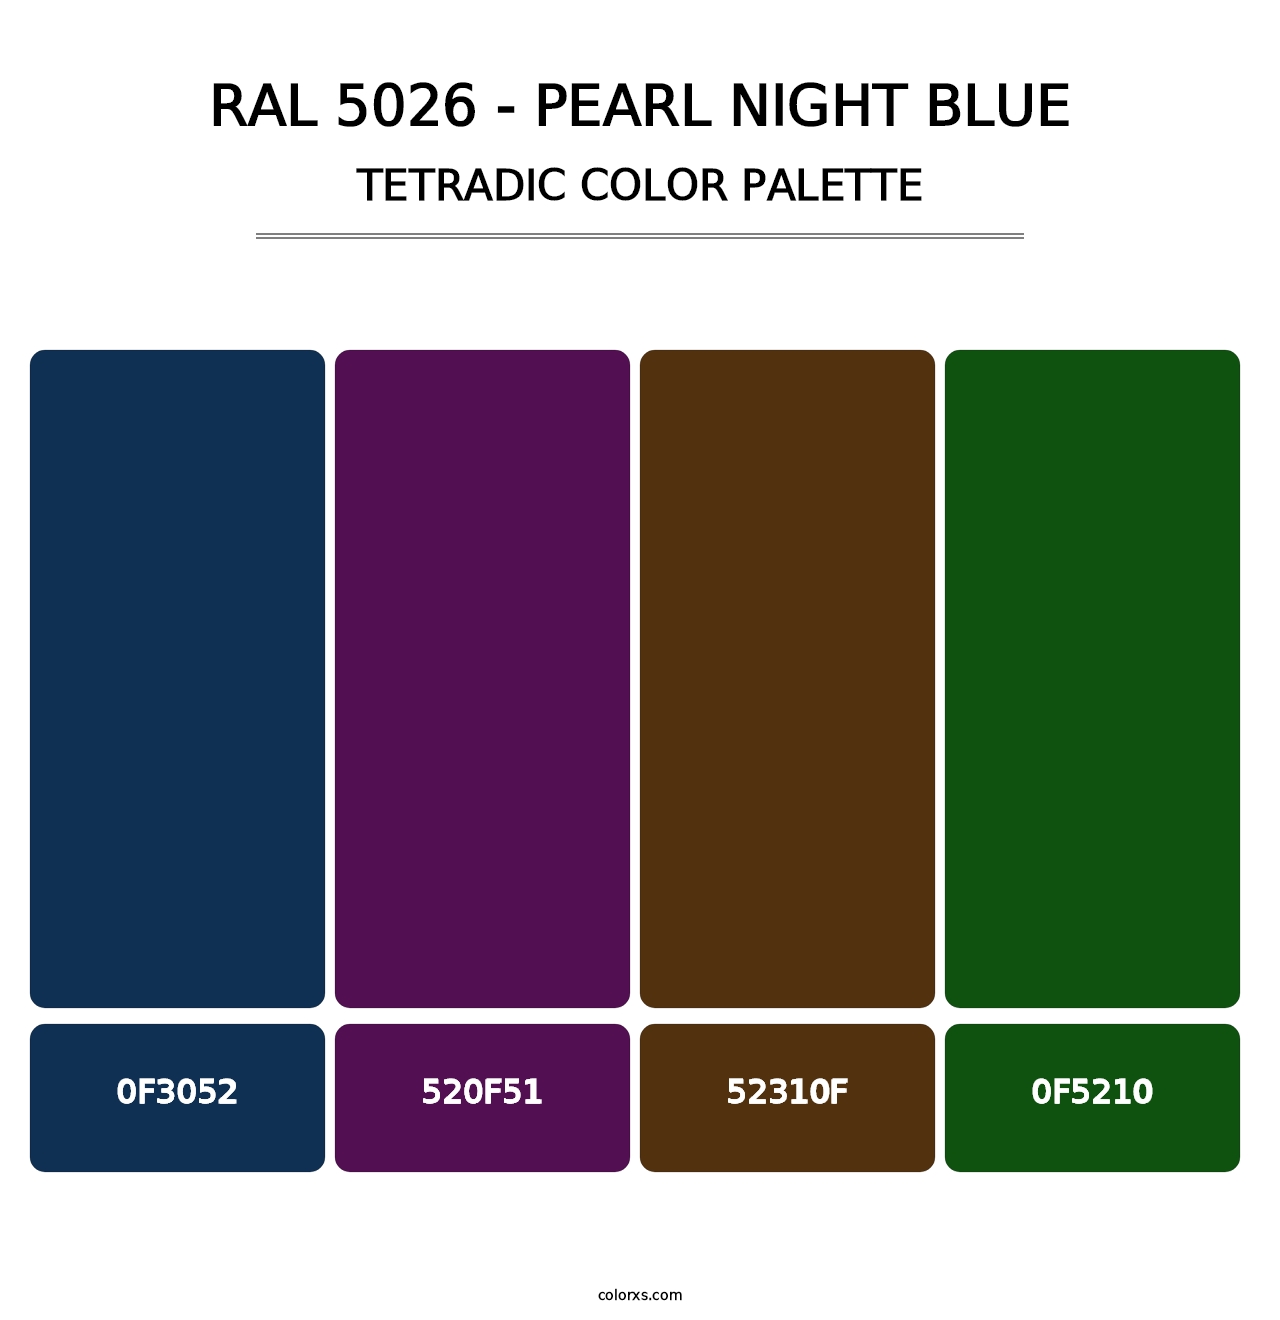 RAL 5026 - Pearl Night Blue - Tetradic Color Palette